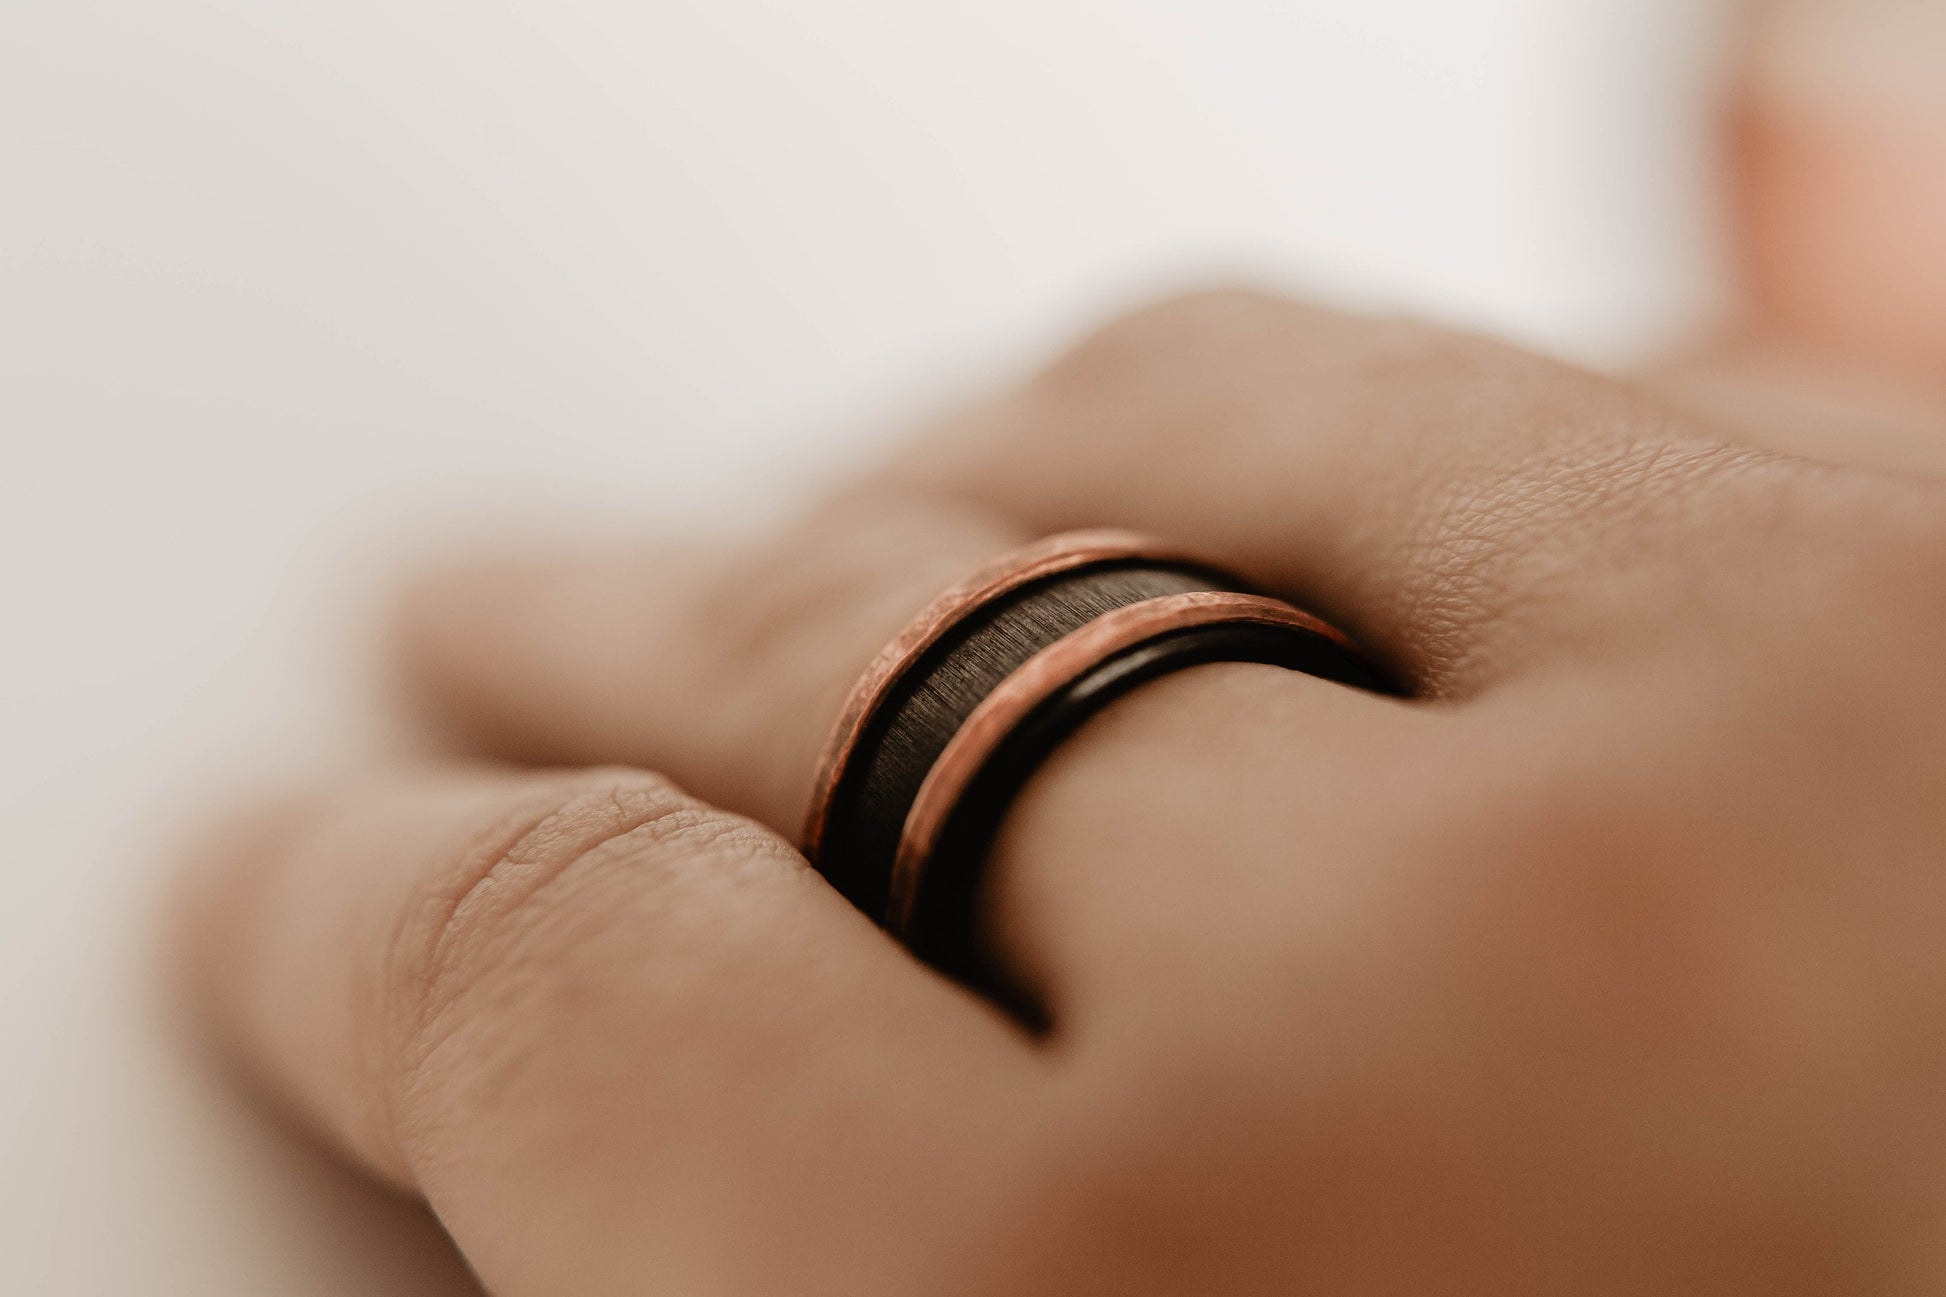 Mens zirconium and copper wedding band. This photo shows a vertical grit zirconium band with a copper band on each edge. (Shown on finger))